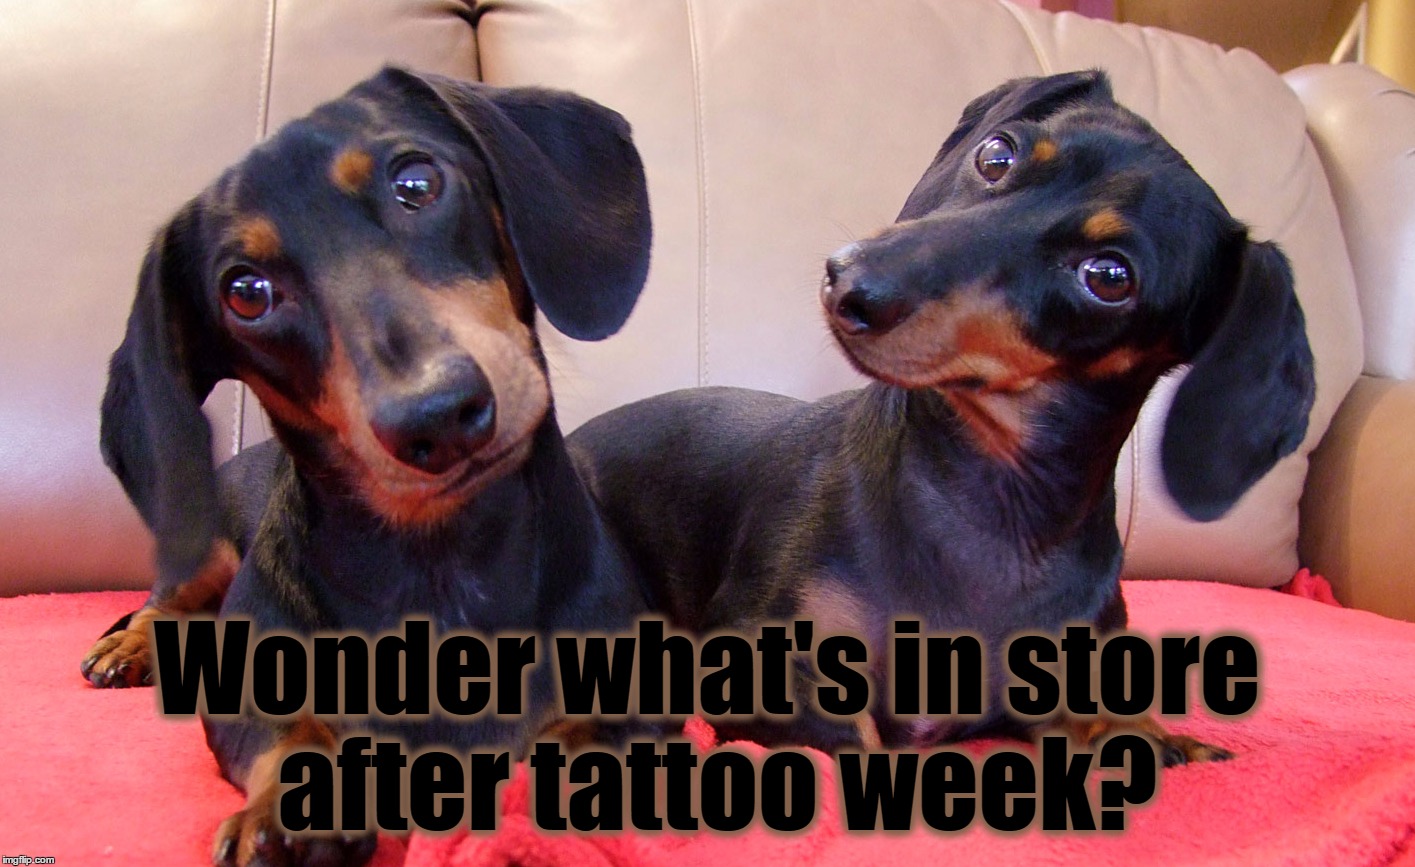 Introducing Dachshund Week (Feb. 2nd To Feb. 9)! | Wonder what's in store after tattoo week? | image tagged in memes,funny,tattoo week,dachshund week,juicydeath1025,prepare yourself | made w/ Imgflip meme maker